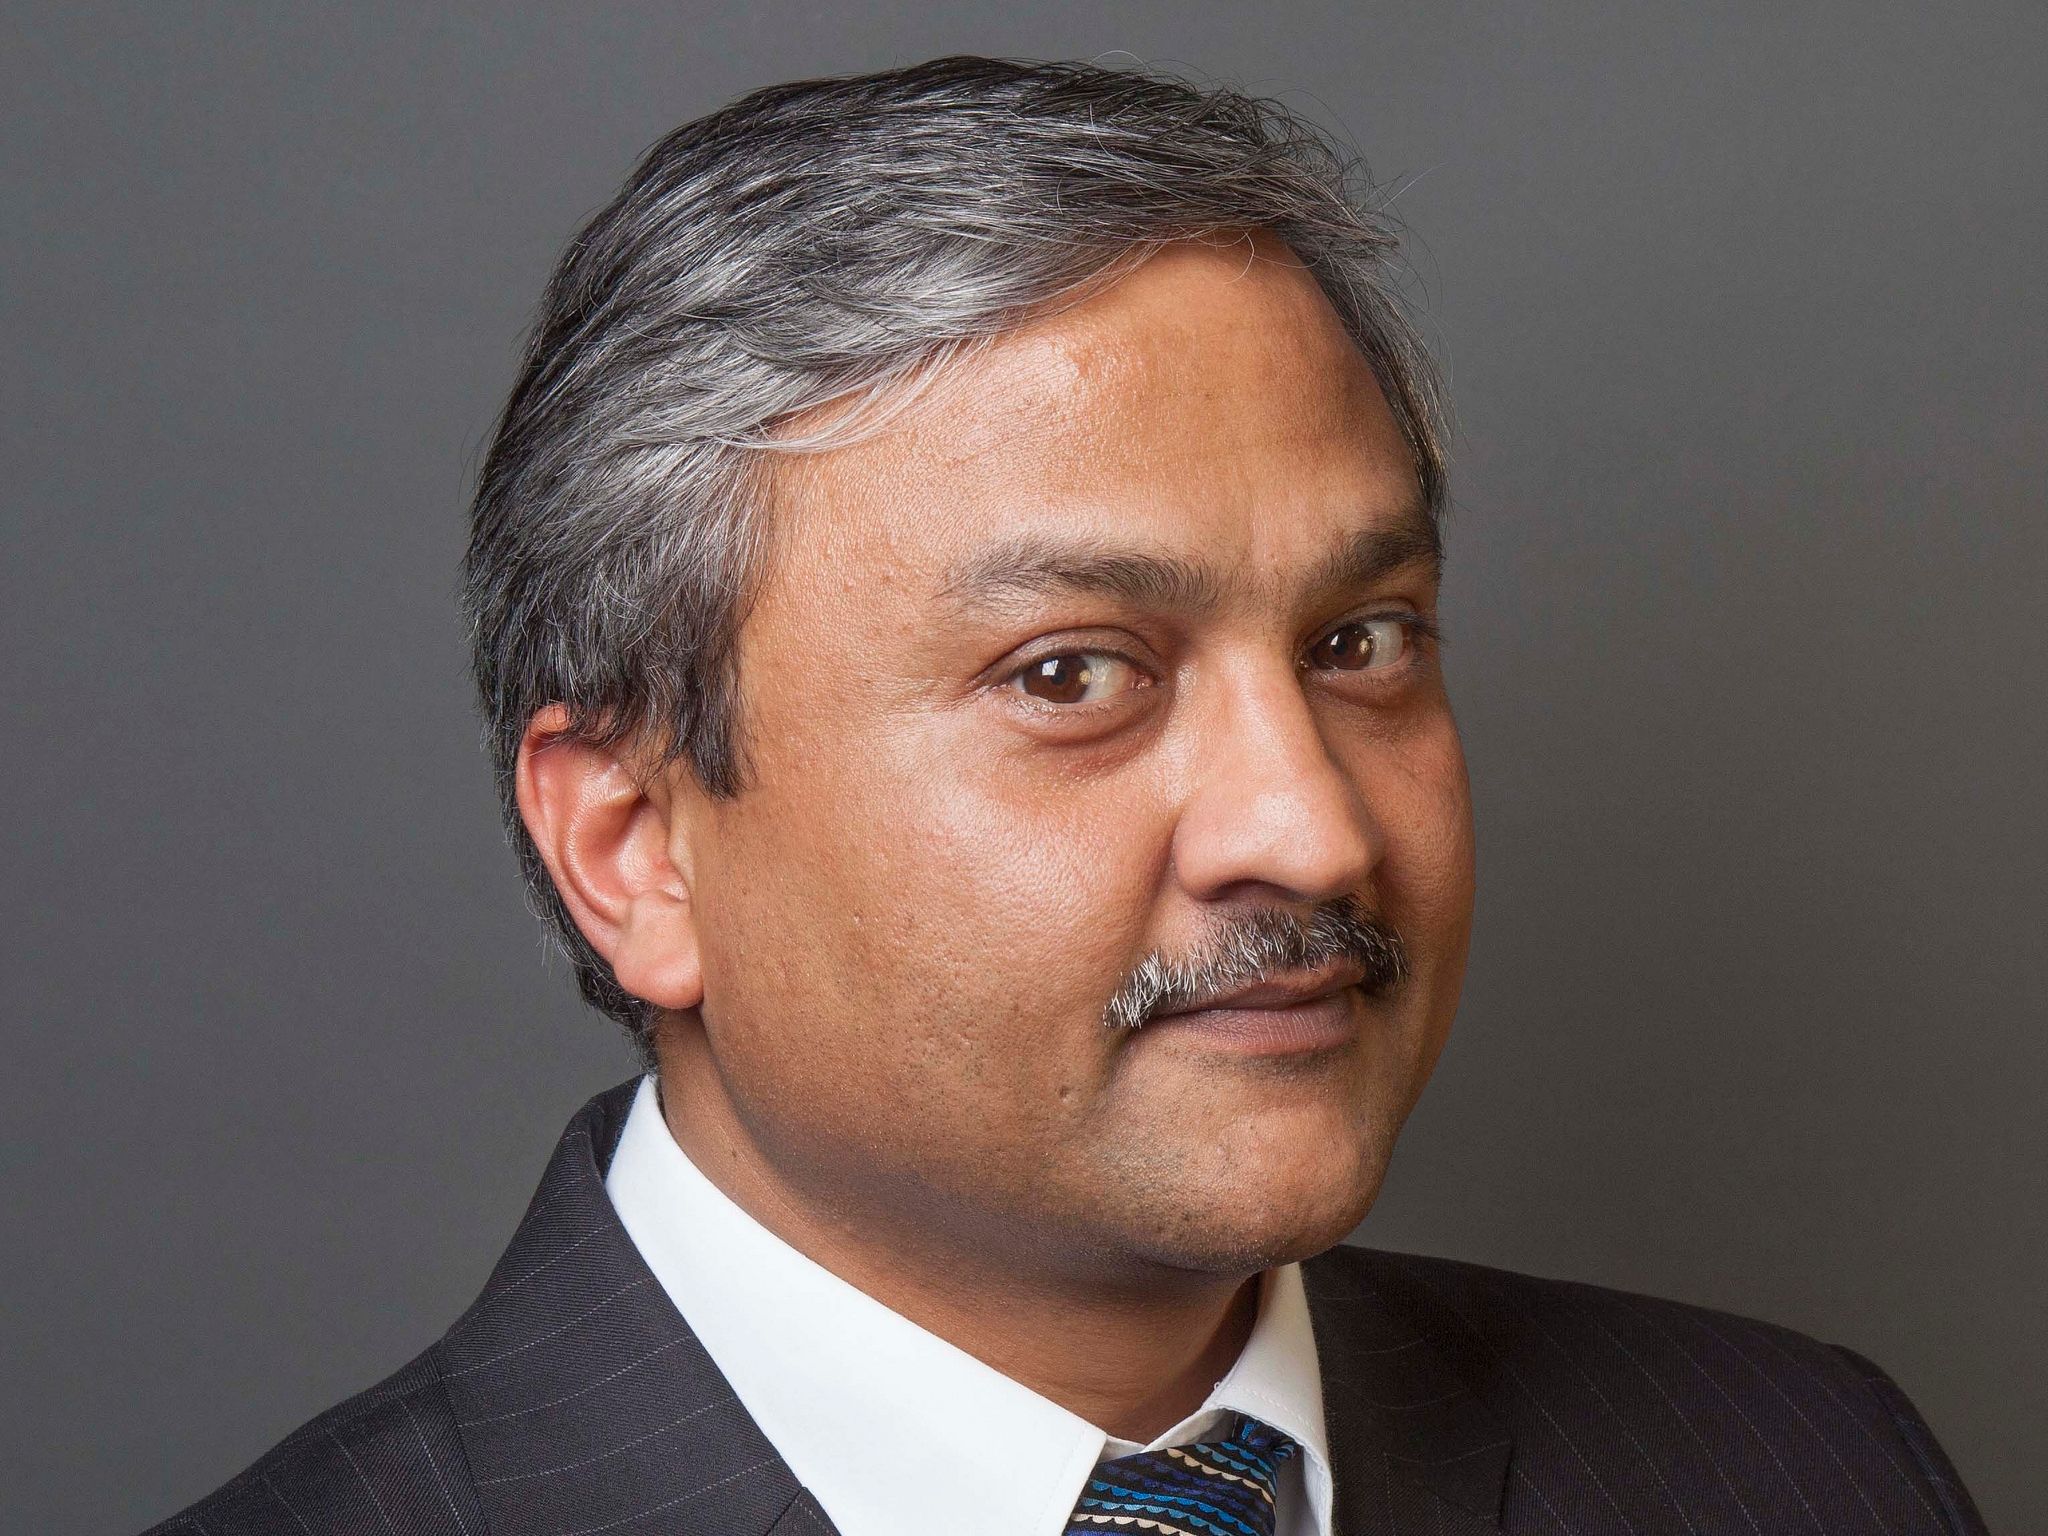 Sathyajit Gubbi is associate professor at the Faculty of Economics and Business of the University of Groningen, with expertise in internationalization and strategic transformation of firms from developing economies